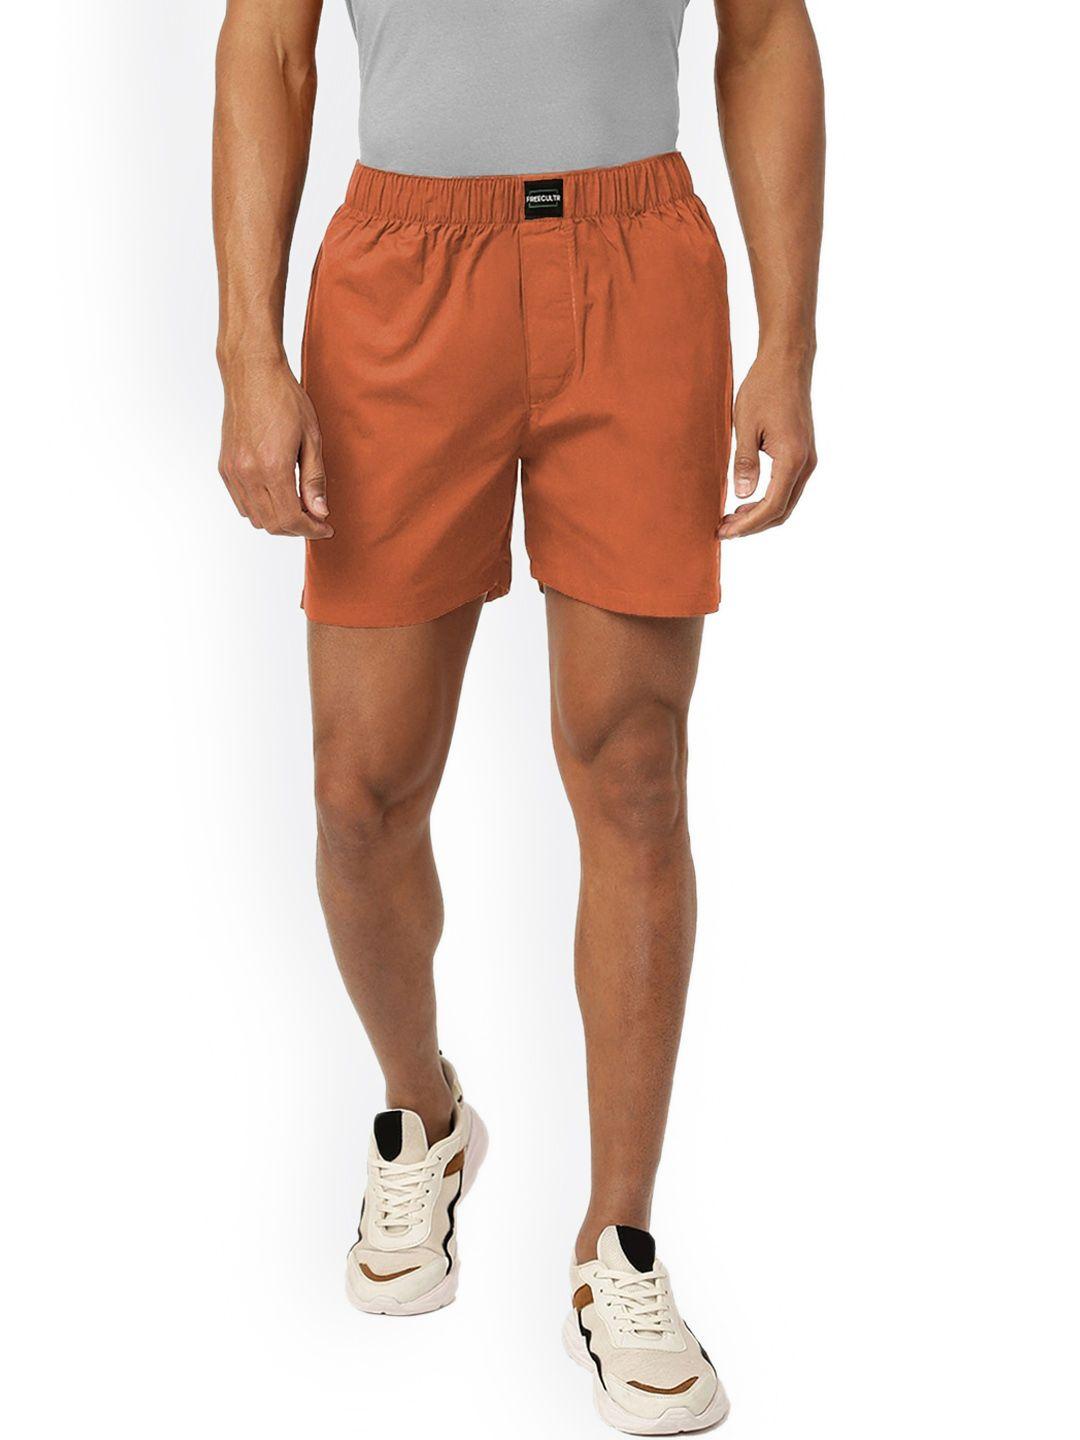 freecultr pure cotton mid-rise boxers fc-bxr-org-01